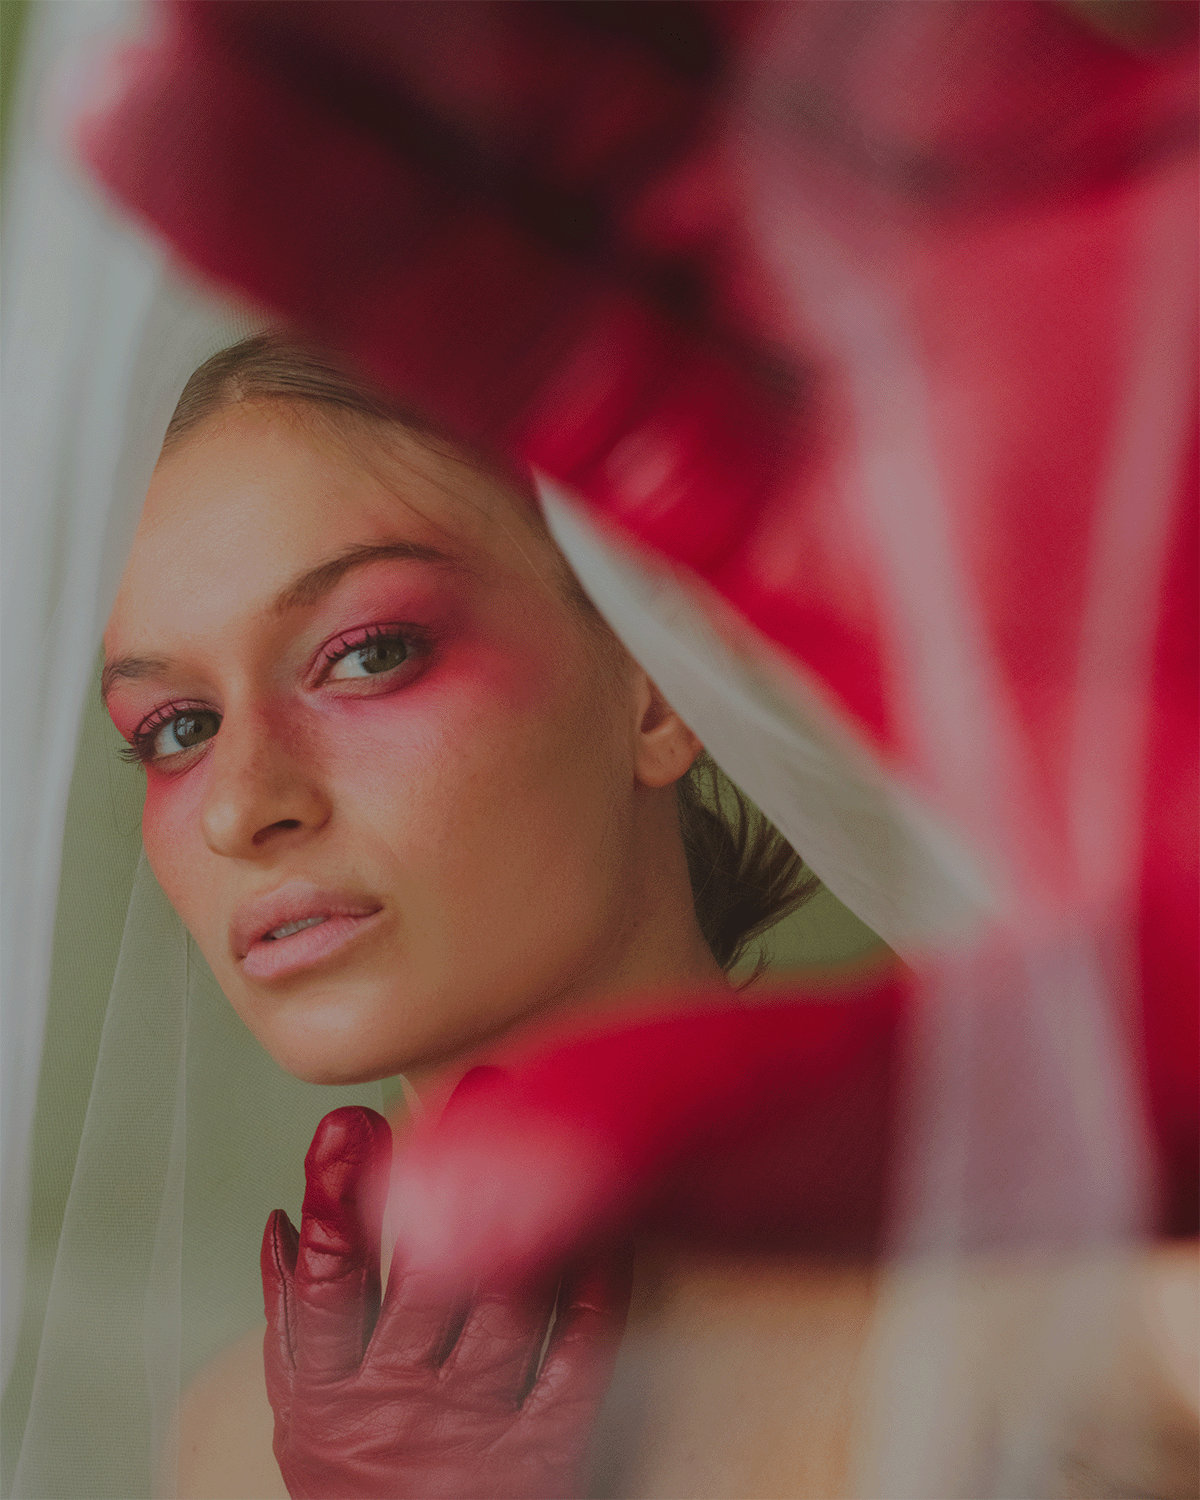 Kayse posing with red gloves framing her face towards the edge of the camera with her red faded makeup starting at her eyes and reaching towards the edges of her face.